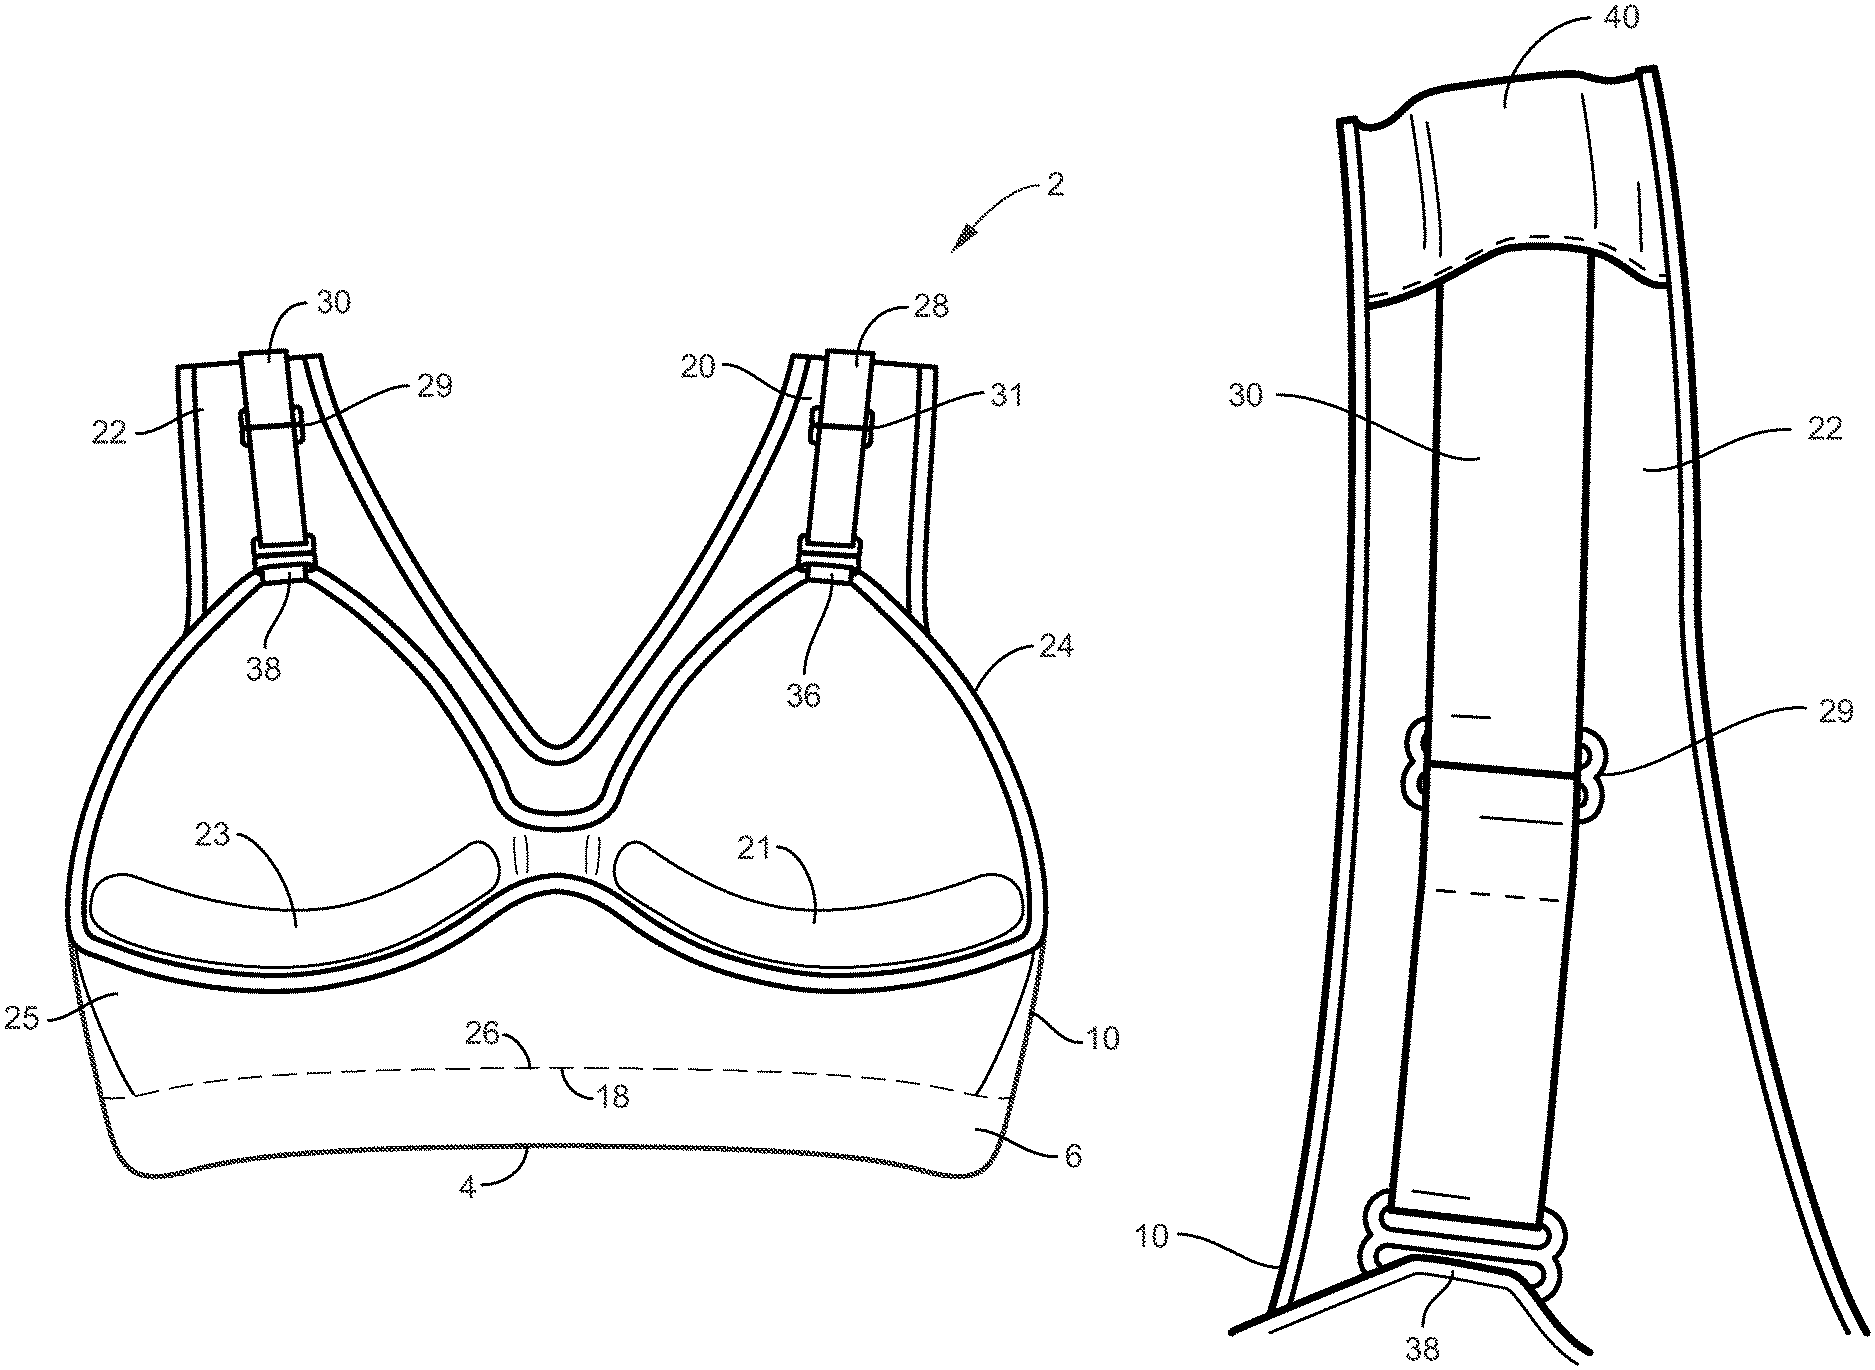 Wireless brassiere with support system Patent Grant Cavosie January 5 ...